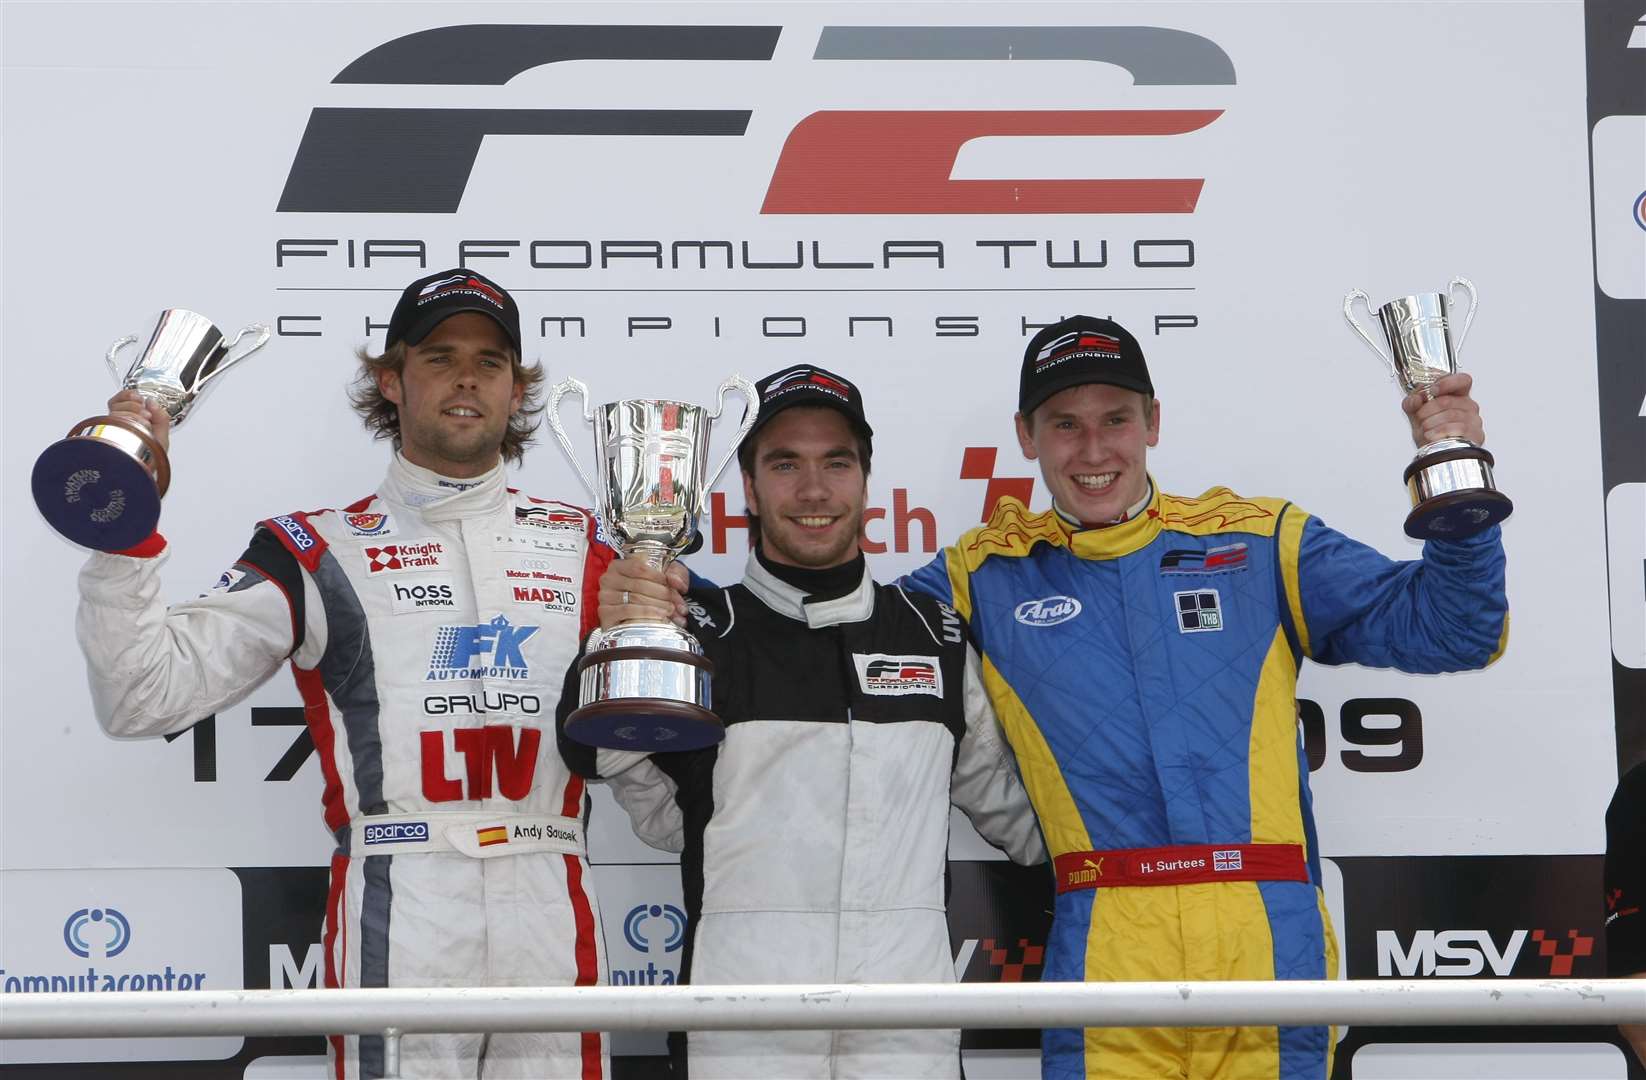 Henry Surtees finished on the podium at Brands Hatch in July 2009 on the day before the fatal accident. He is pictured here with Andy Soucek and Philipp Eng. Picture: PSP Images